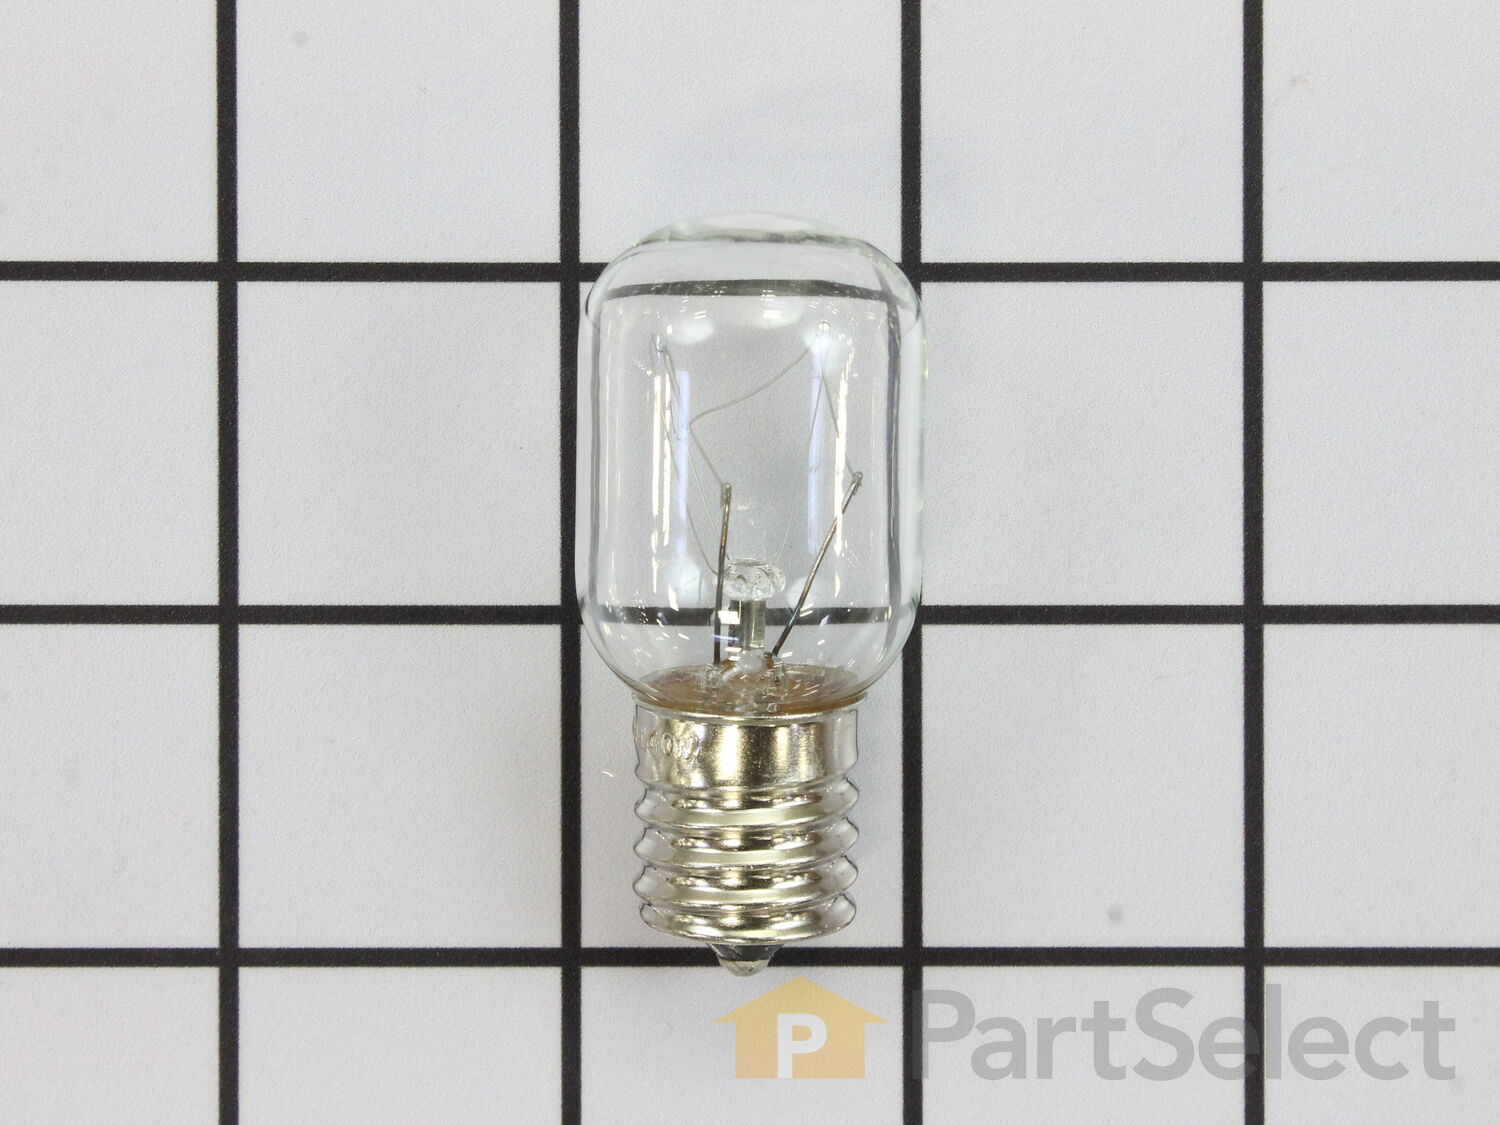 Where can I find this light bulb for my range hood?, Off-Topic Discussion  forum